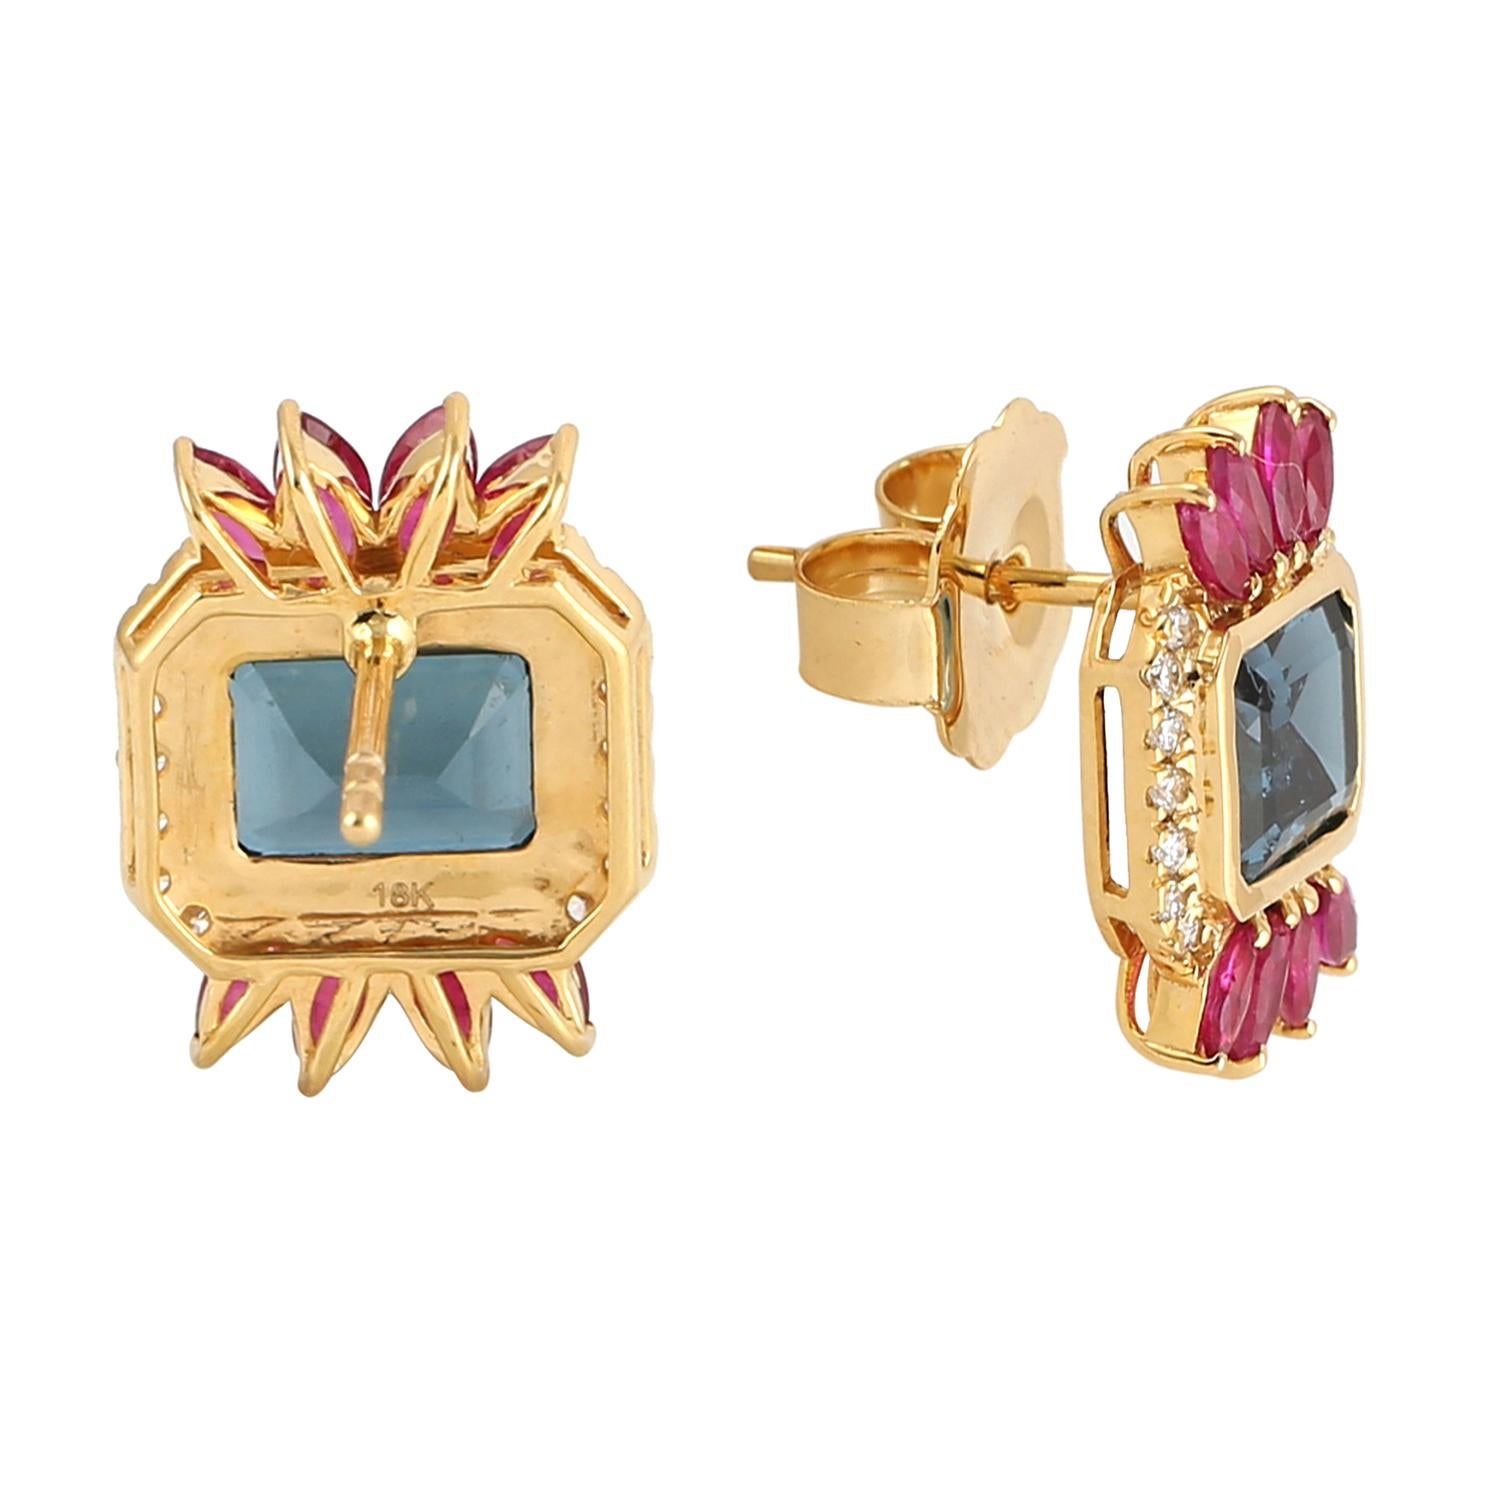 These beautiful earrings are cast in 14-karat gold. It is handset in 1.4 carats ruby, 3.75 carats topaz and illuminated with .22 carats of glittering diamonds. Also see matching ring.

The ring is a size 7 and may be resized to larger or smaller